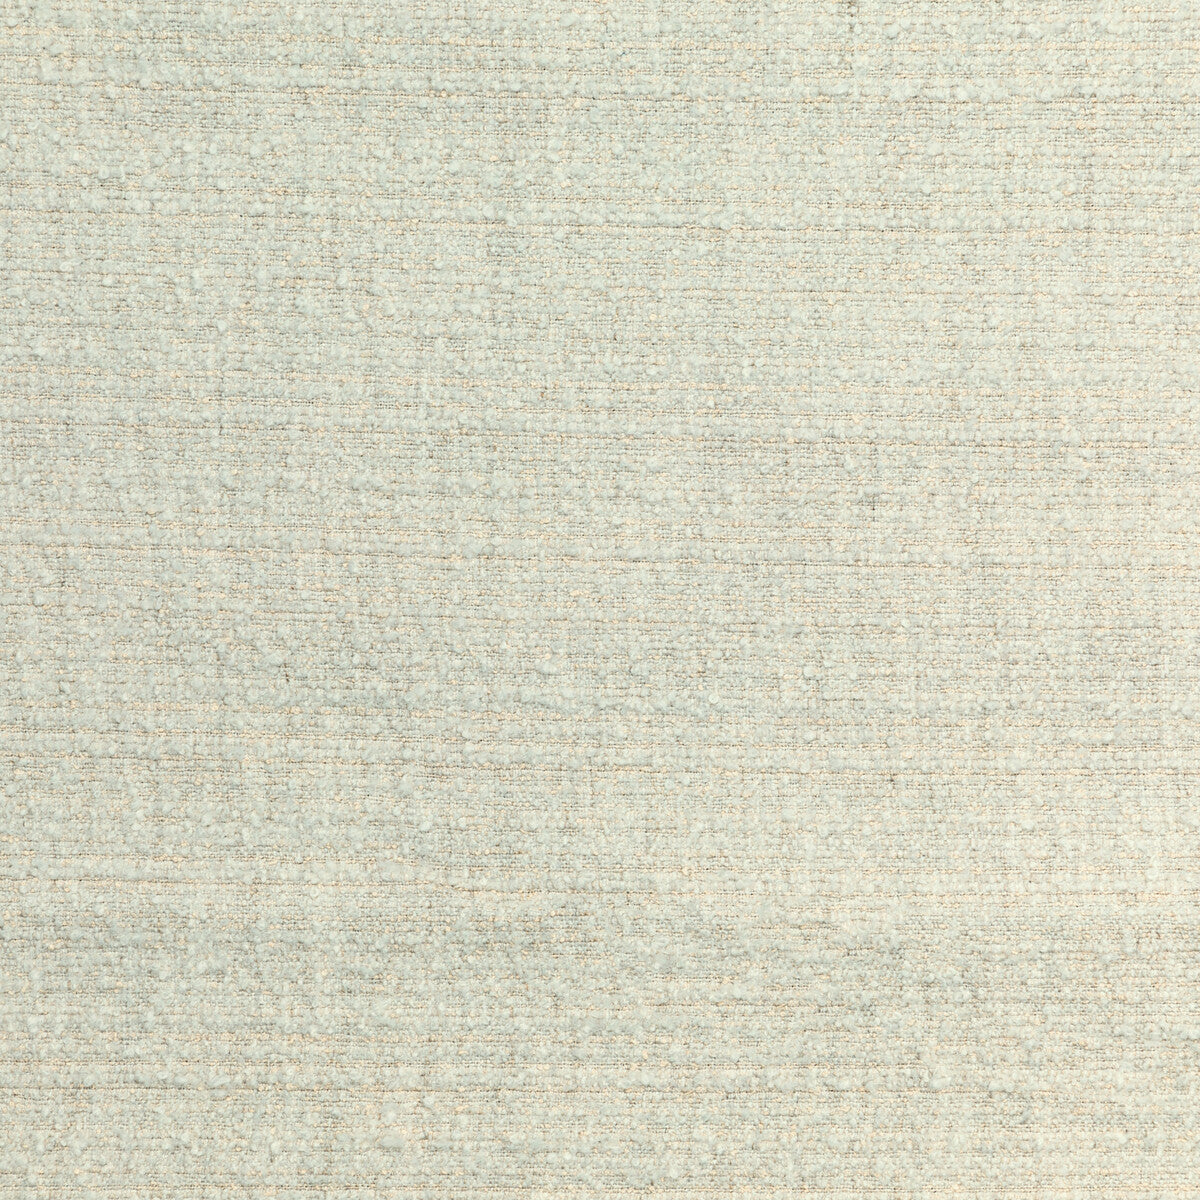 Lune fabric in salt color - pattern GWF-3767.1.0 - by Lee Jofa Modern in the Kelly Wearstler VI collection